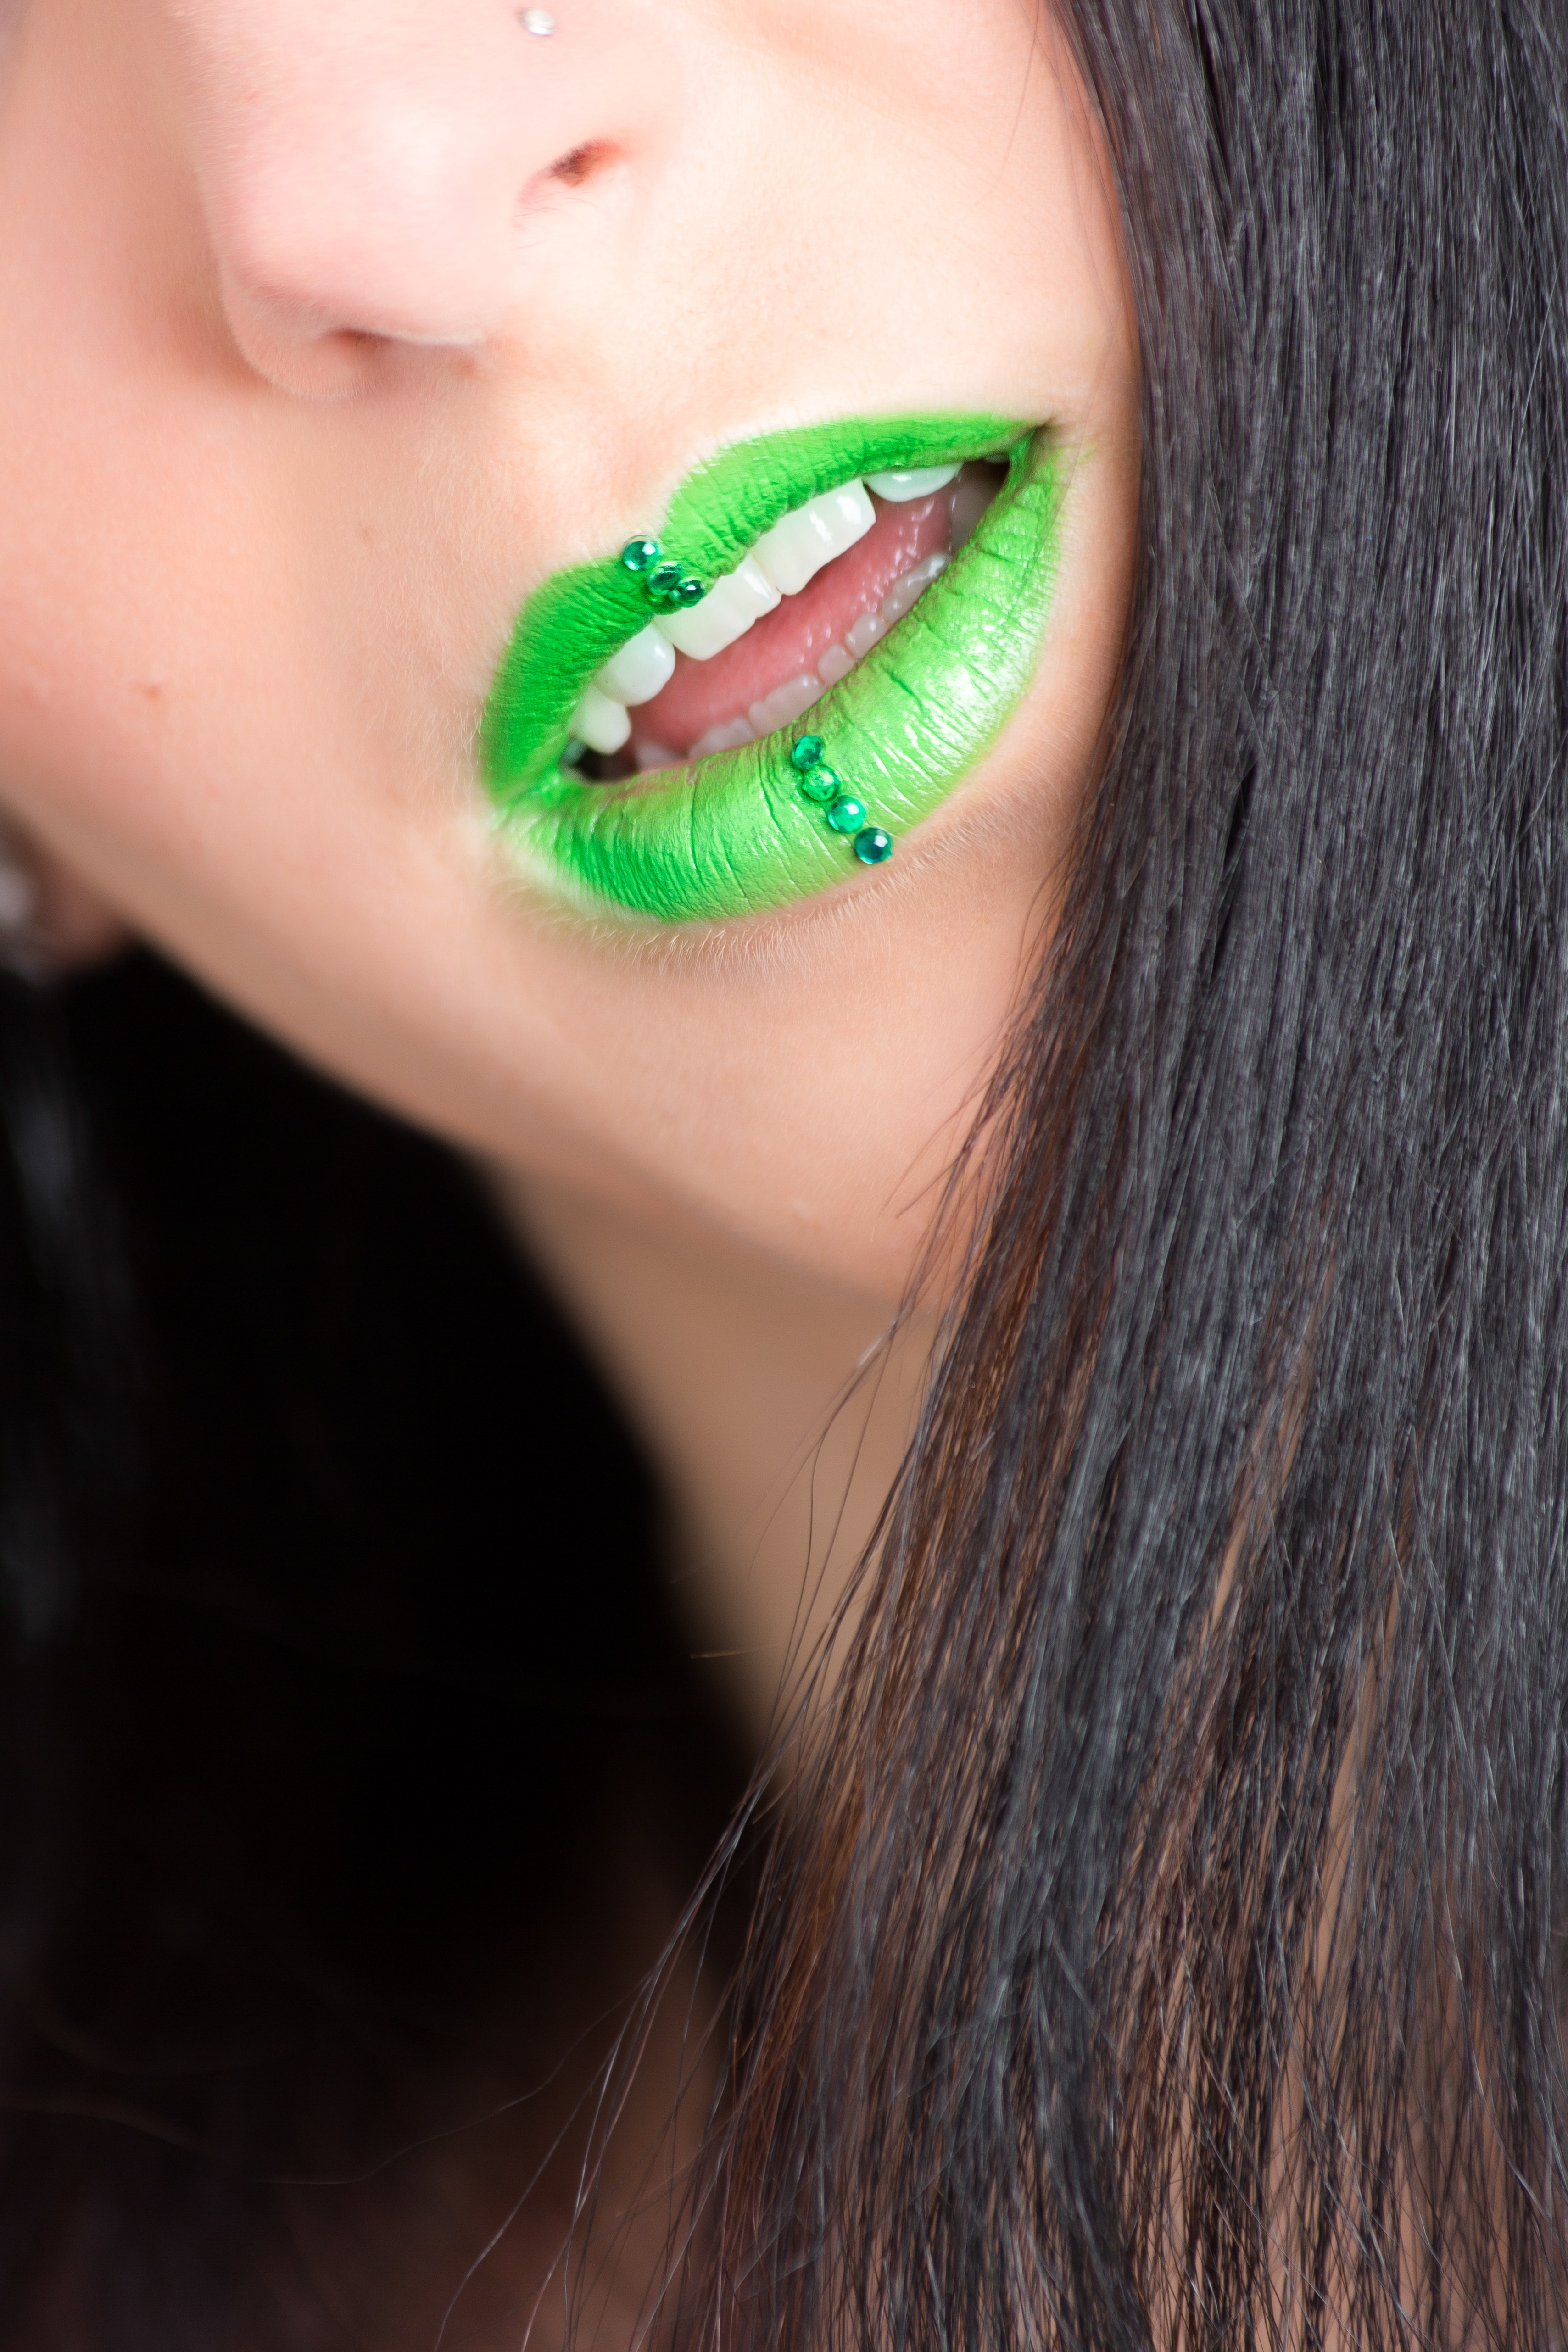 Free photo: Photo of Woman in Green Lipstick - Adult, Makeup, Woman ...